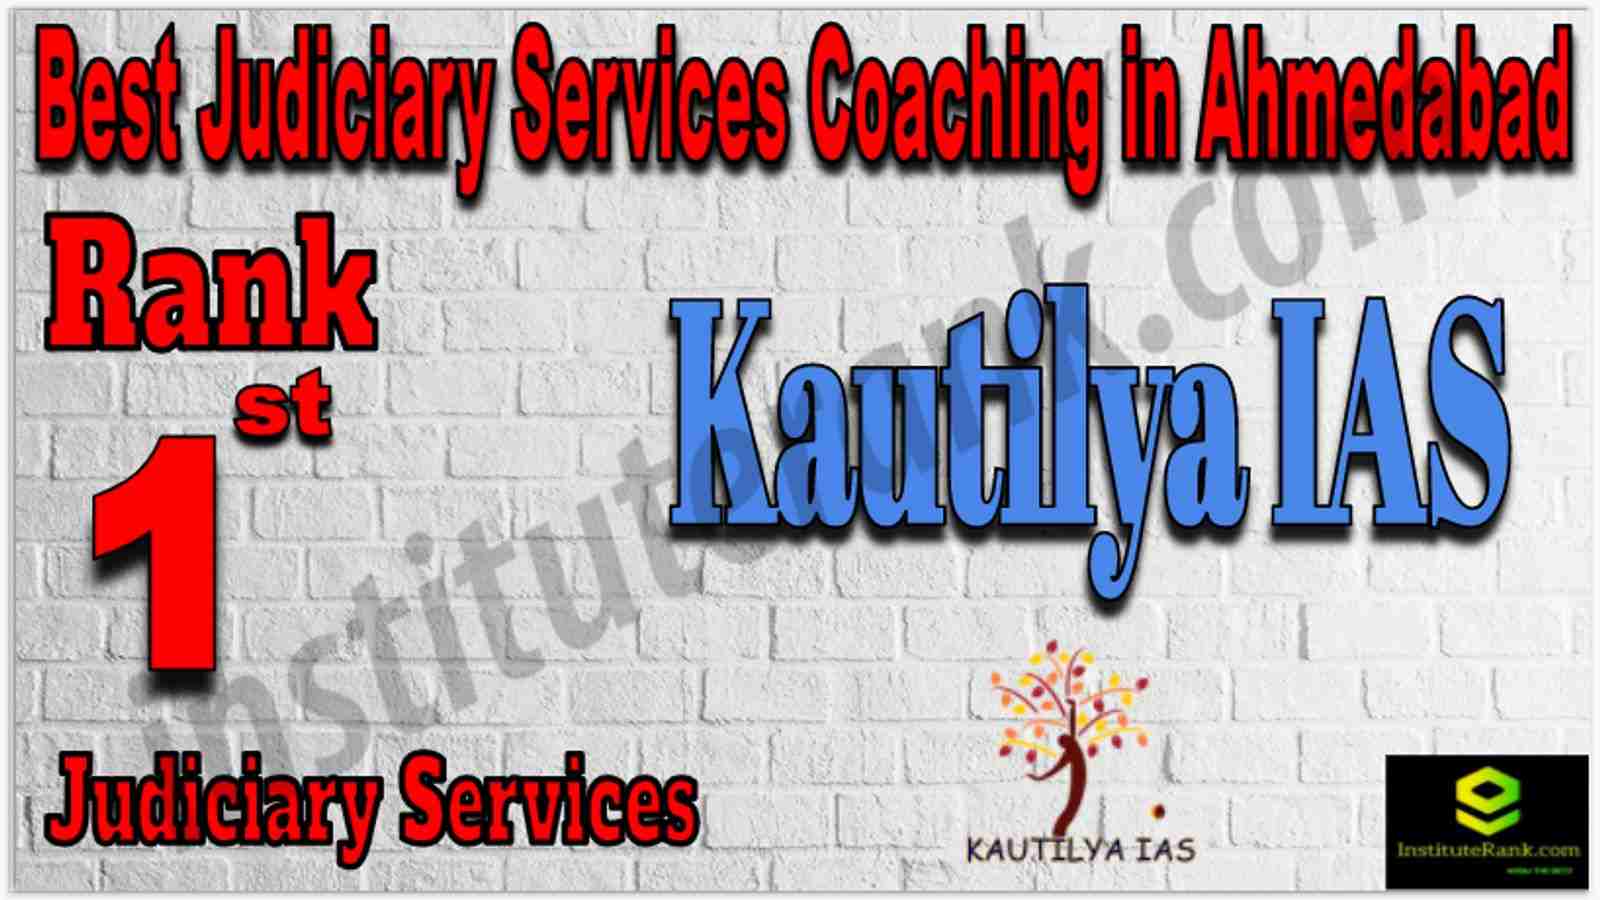 Rank 1 Best Judiciary Services Coaching in Ahmedabad